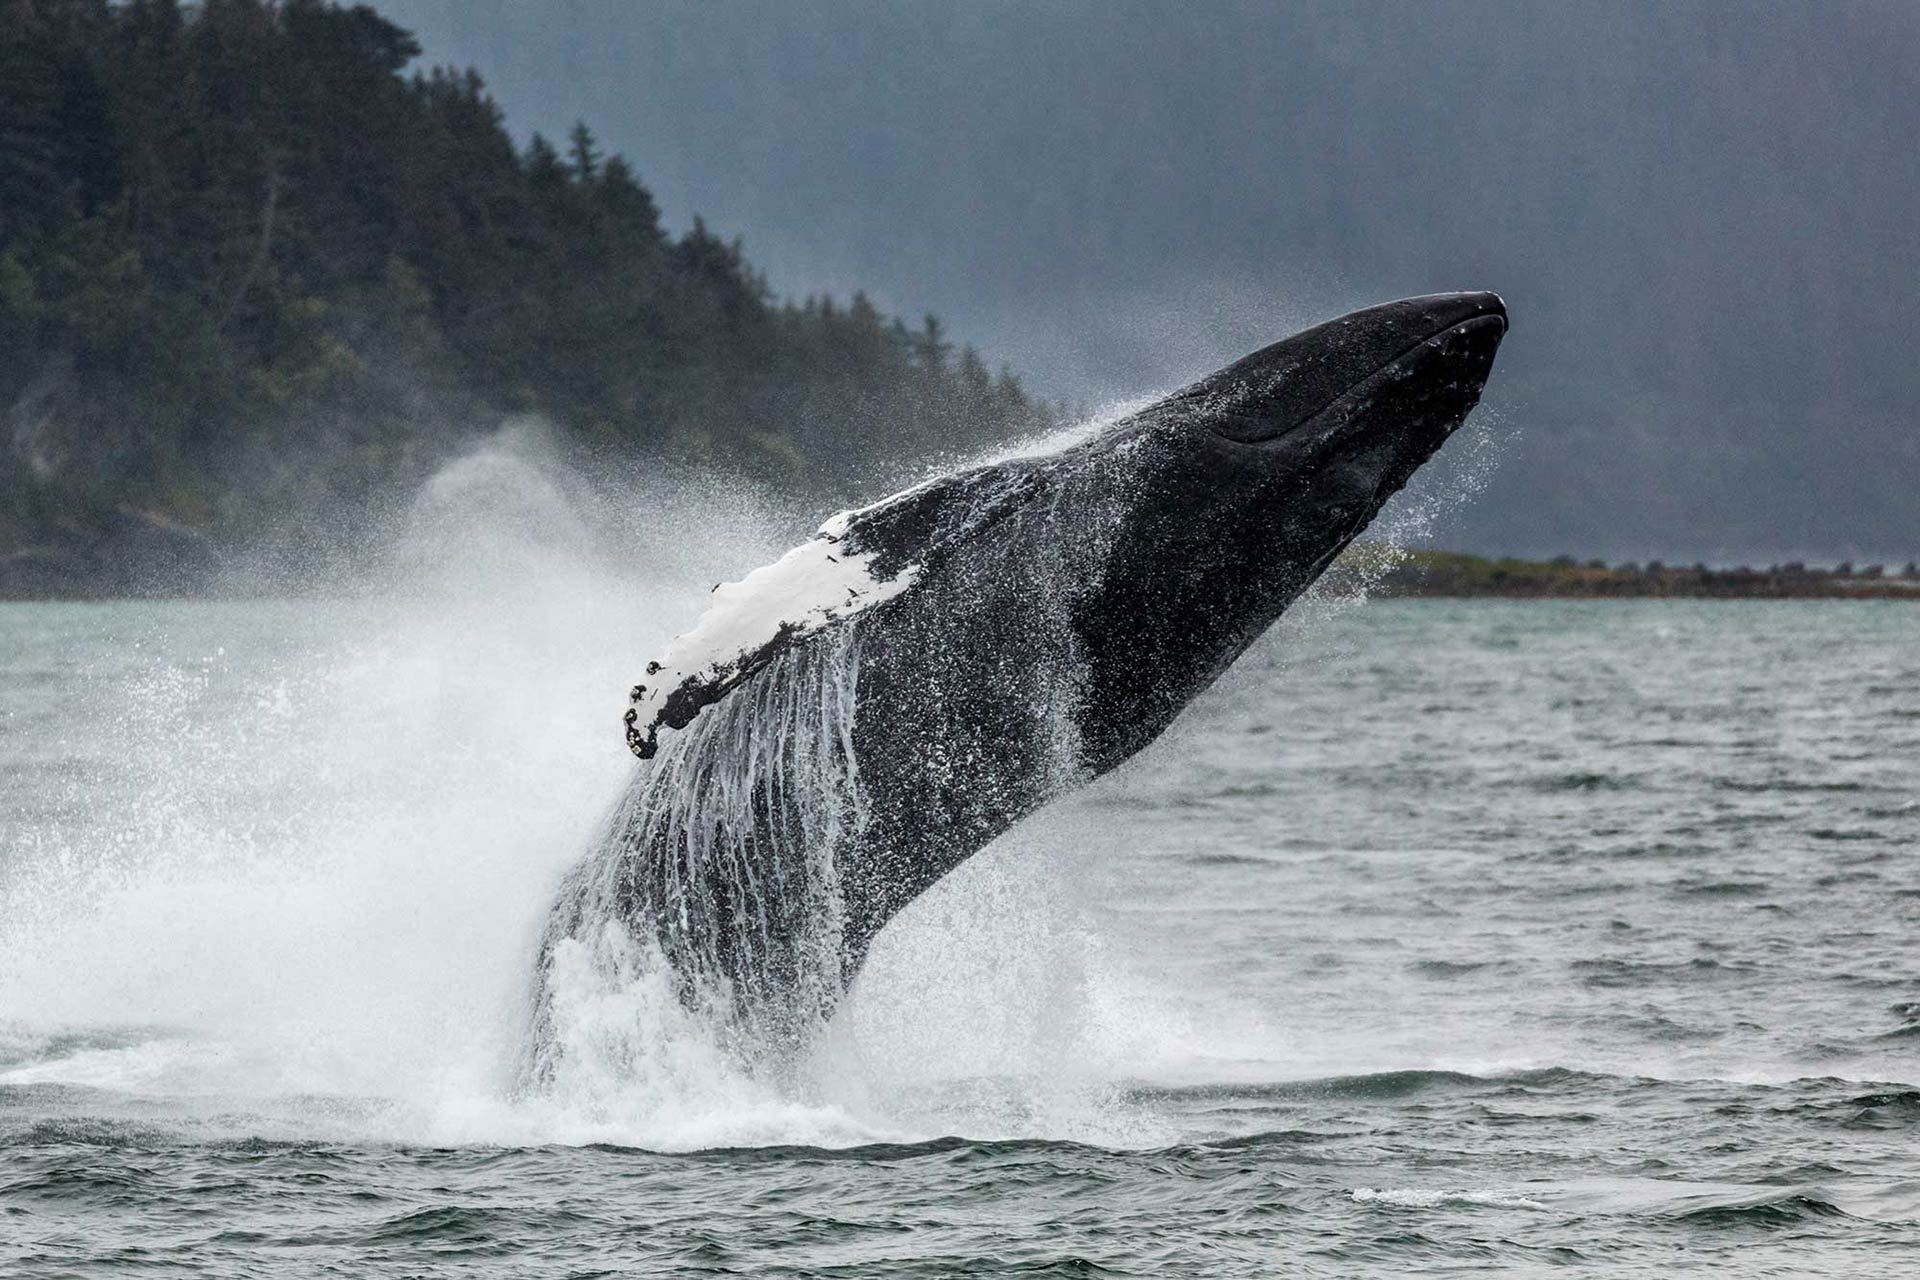 whale watching tour in alaska